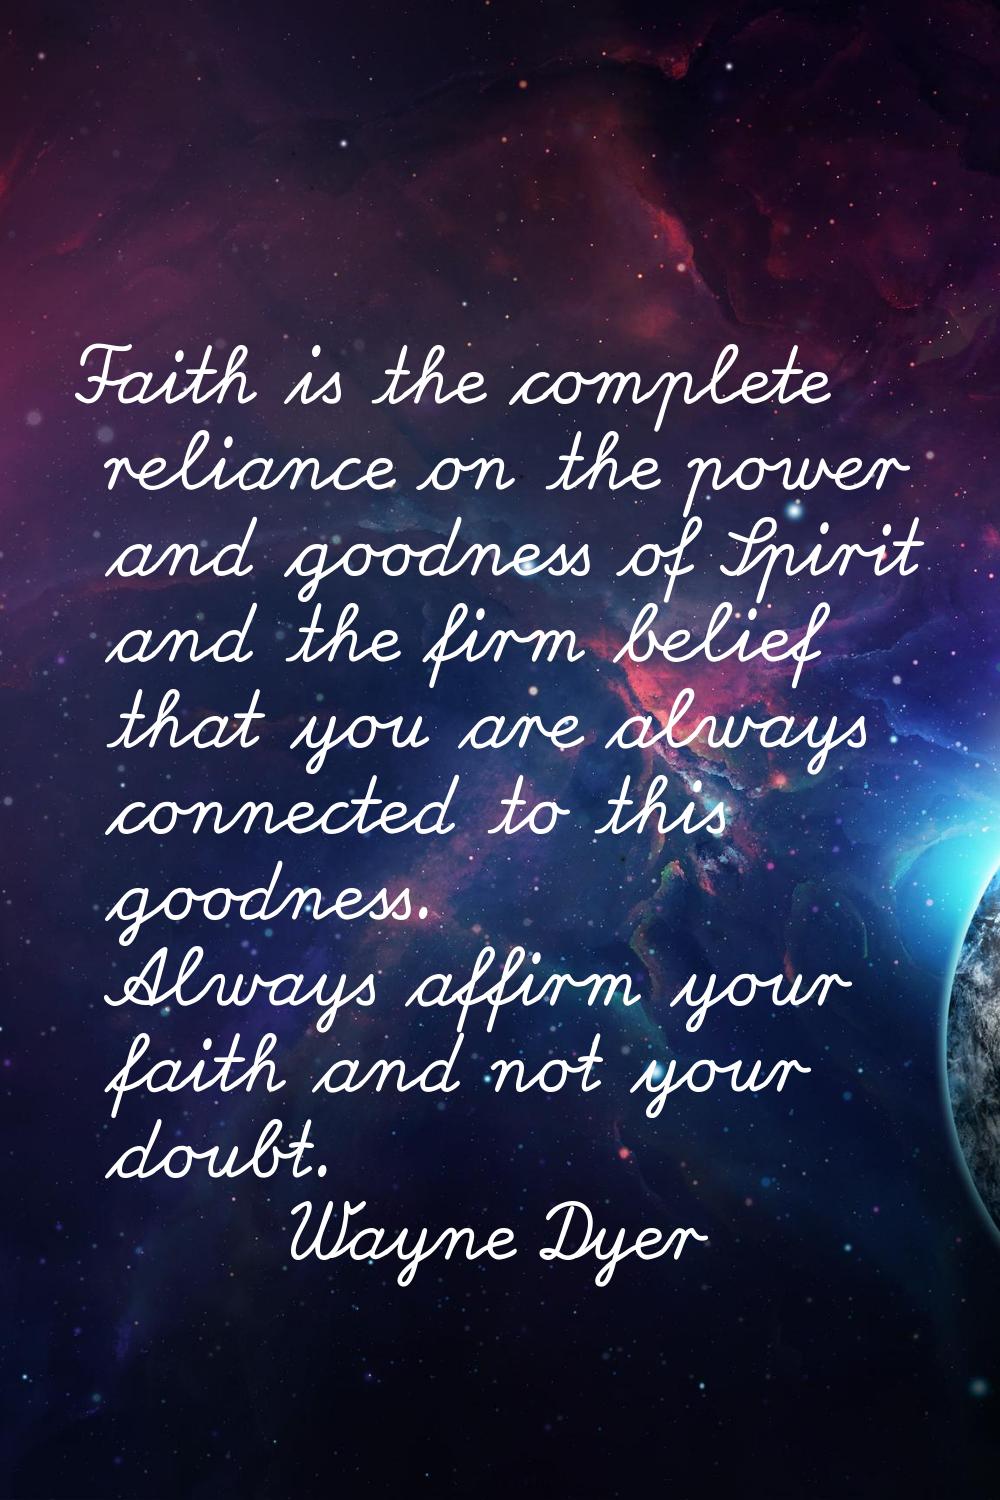 Faith is the complete reliance on the power and goodness of Spirit and the firm belief that you are